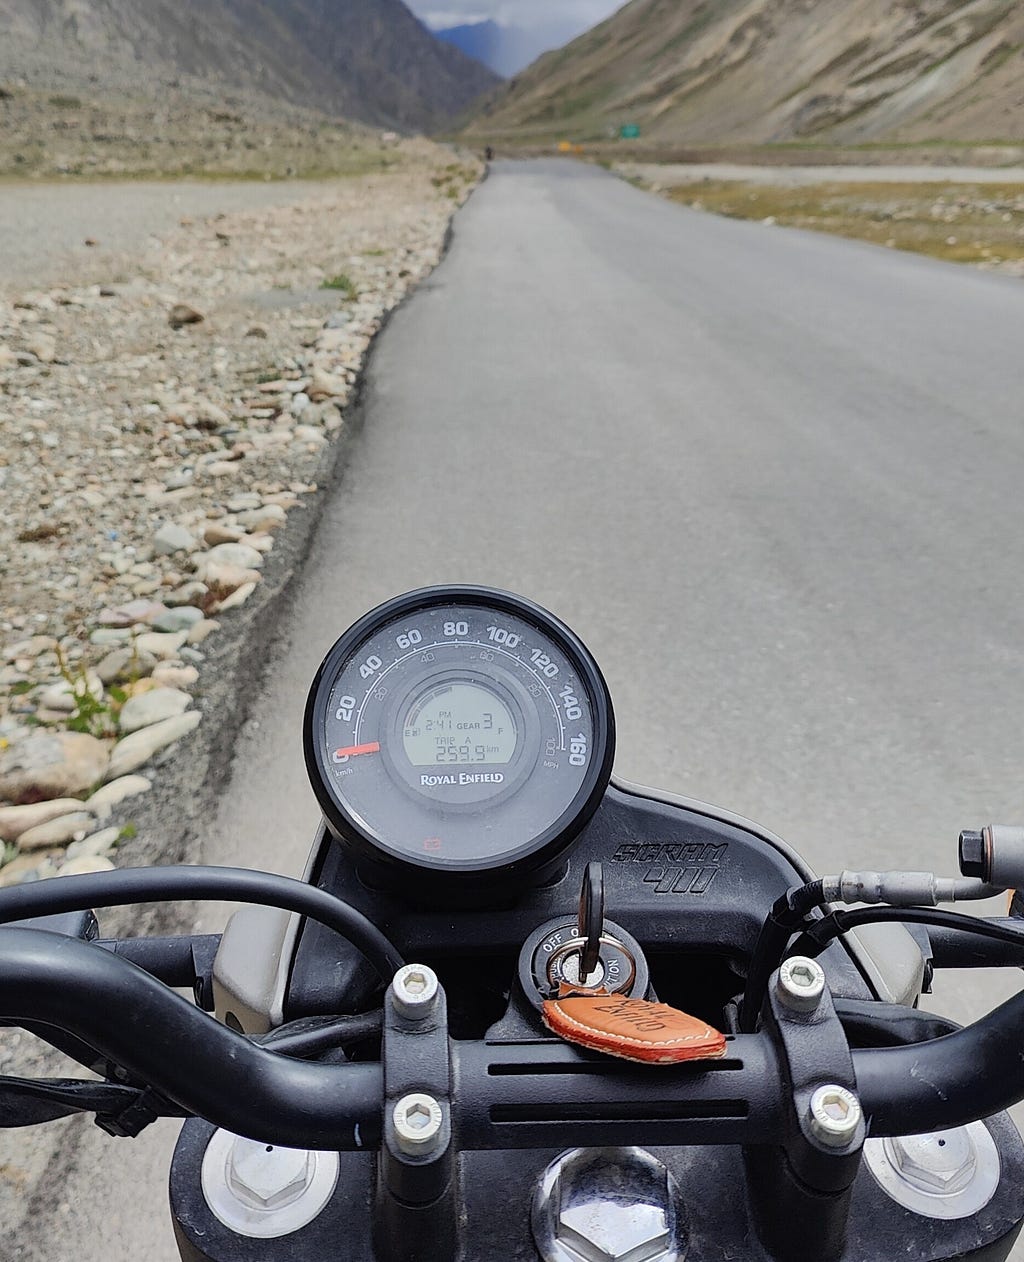 A picture of Aishwarya’s motorbike with the speedometer in focus and a highway in sight.